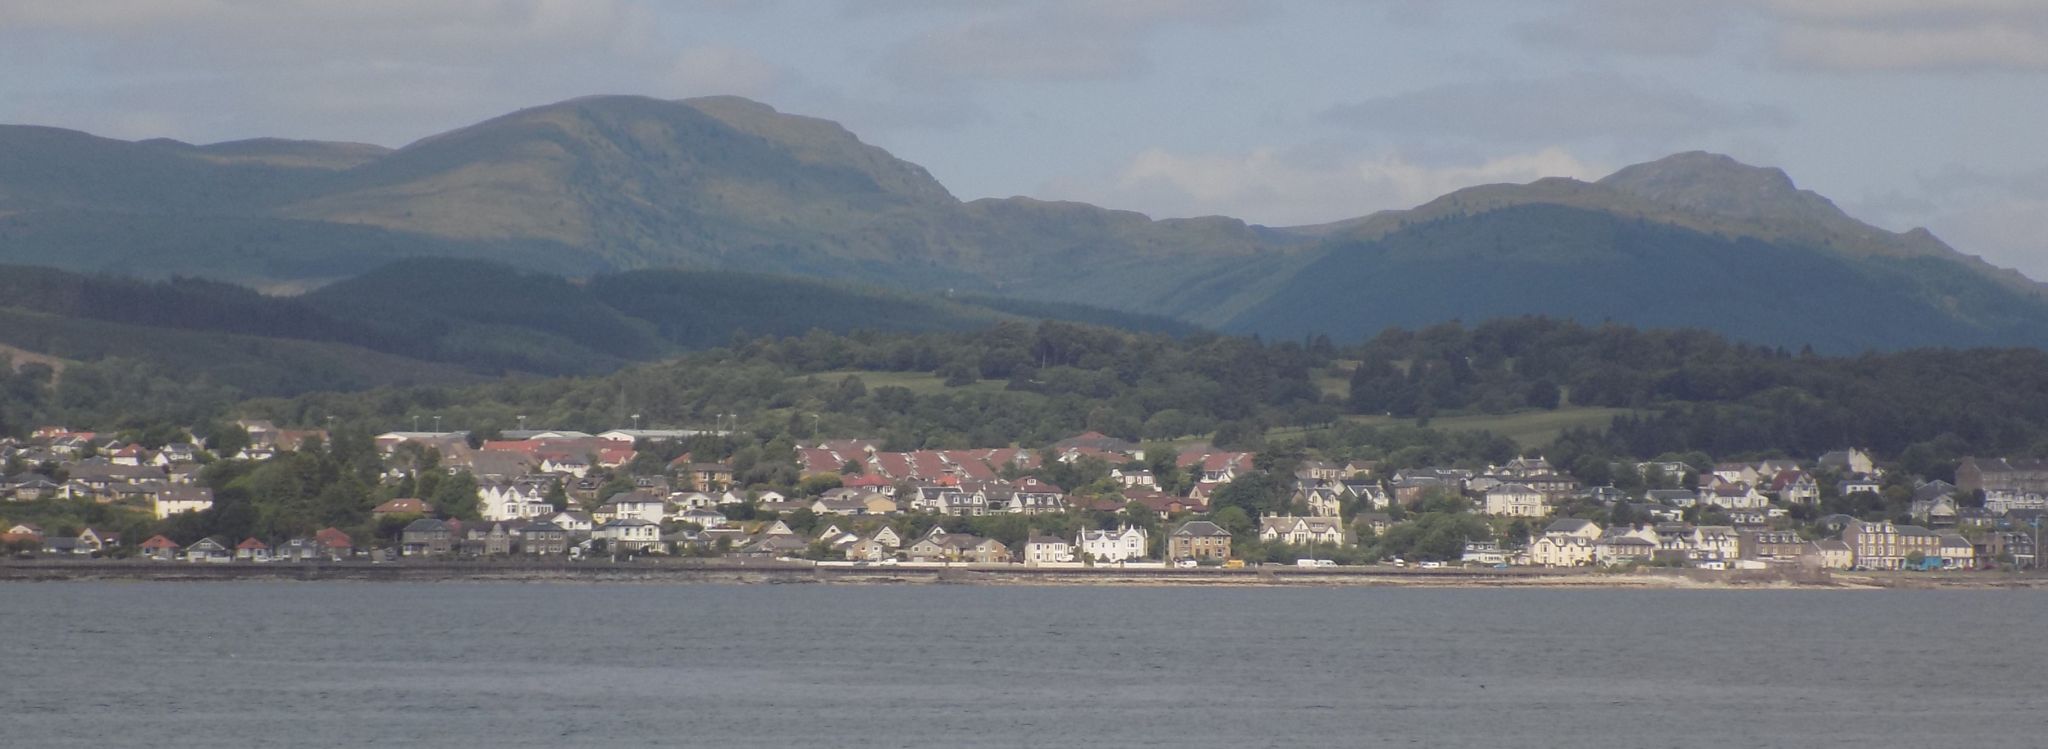 The Cowal Hills above  Dunoon  across the Firth of Clyde from the Cloch Lighthouse